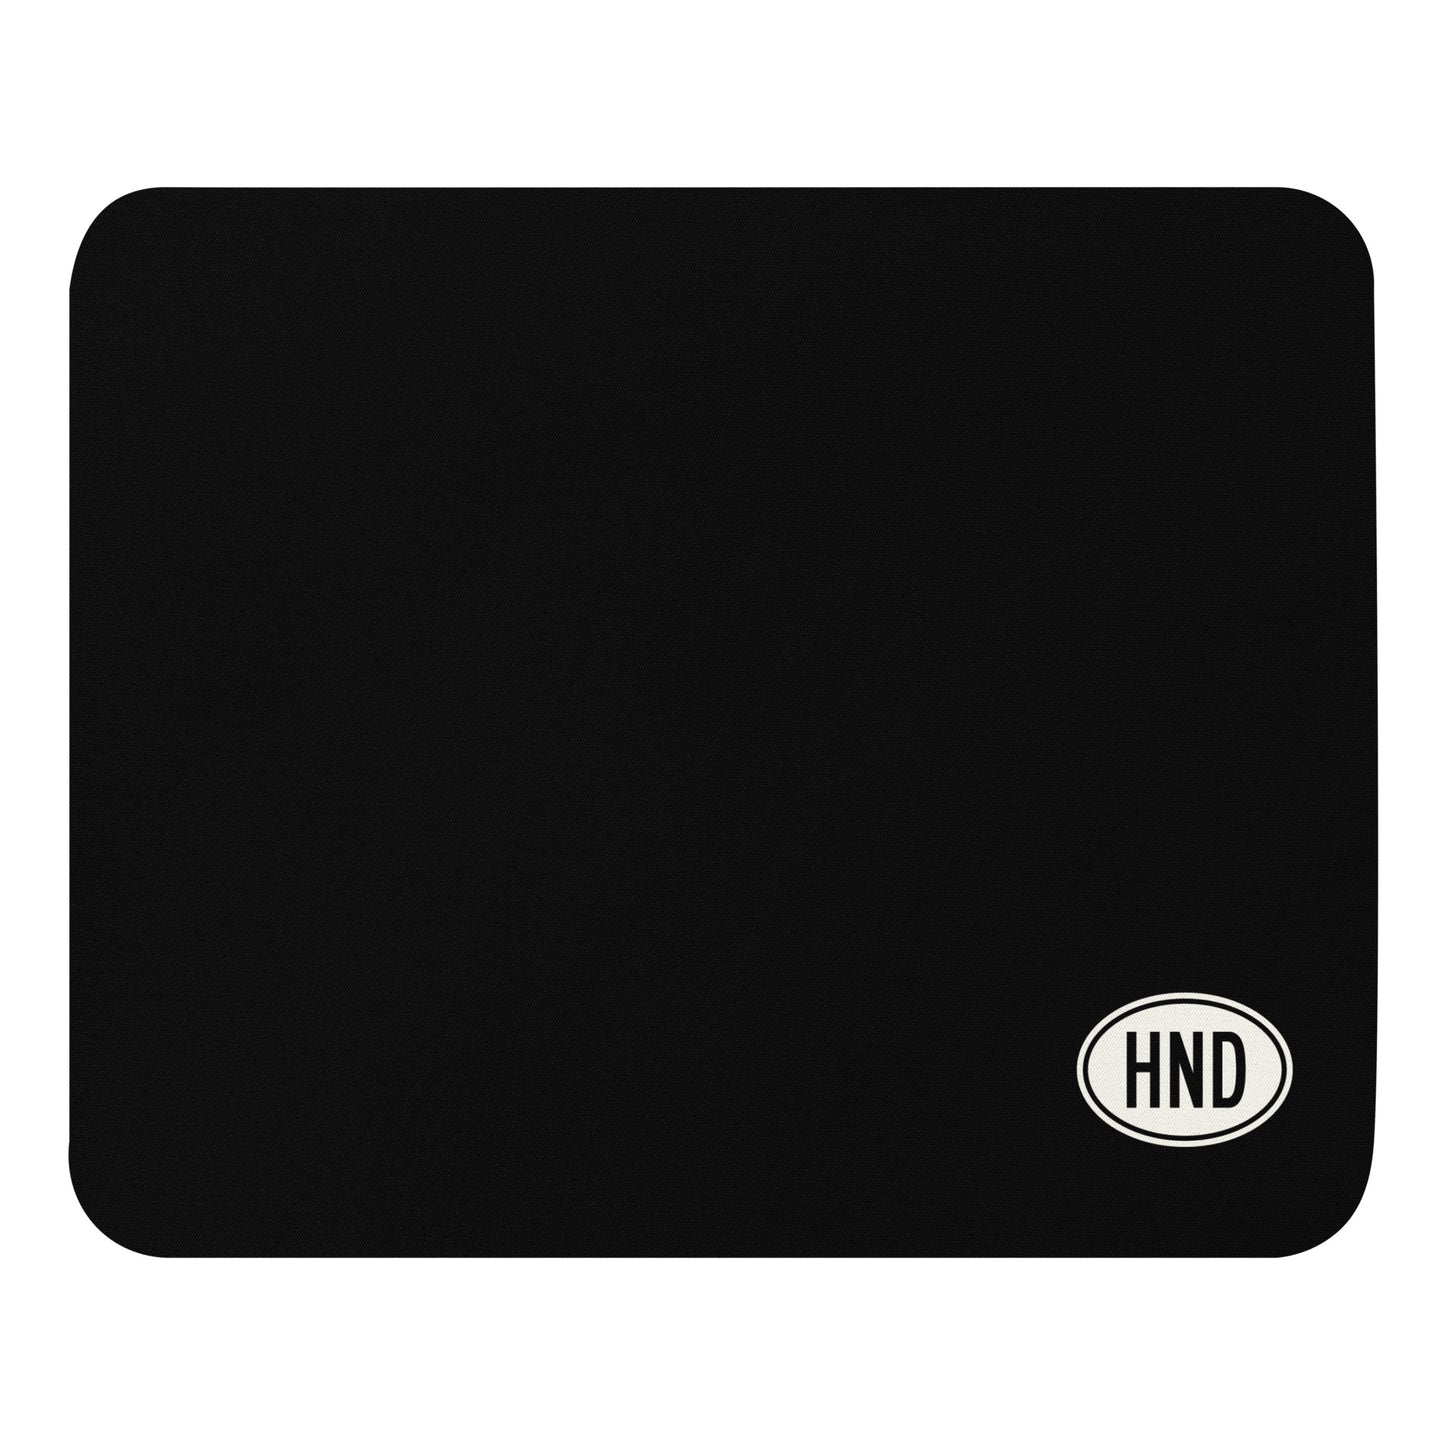 Unique Travel Gift Mouse Pad - White Oval • HND Tokyo • YHM Designs - Image 01